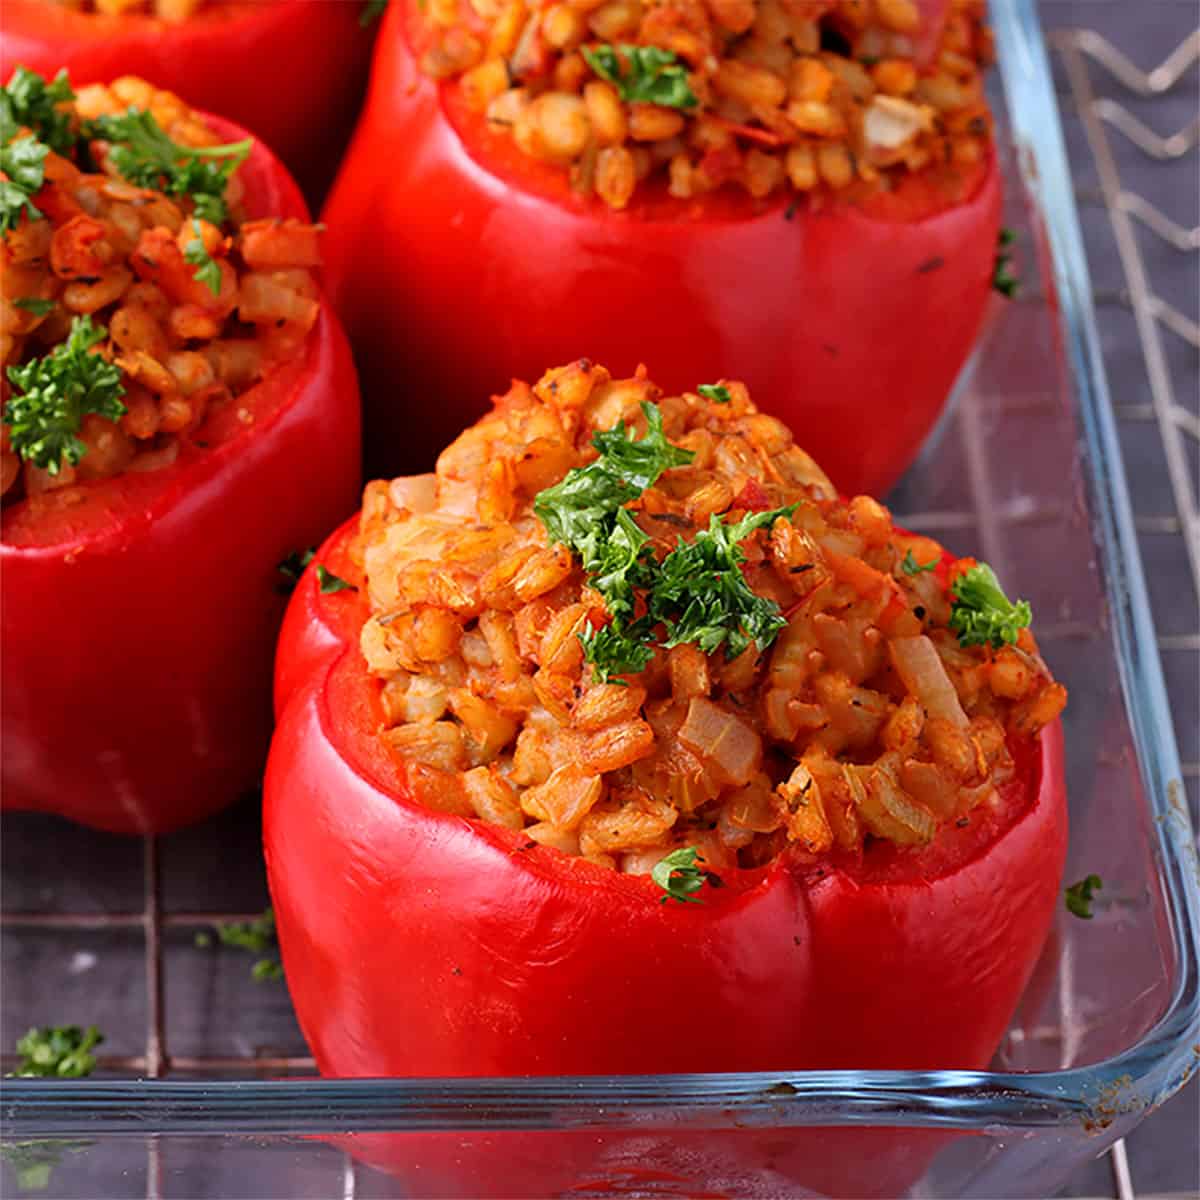 whole red peppers are stuffed with cooked barley, onions, carrots, tomatoes, white beans and tomatoes and garnished with chopped parsley